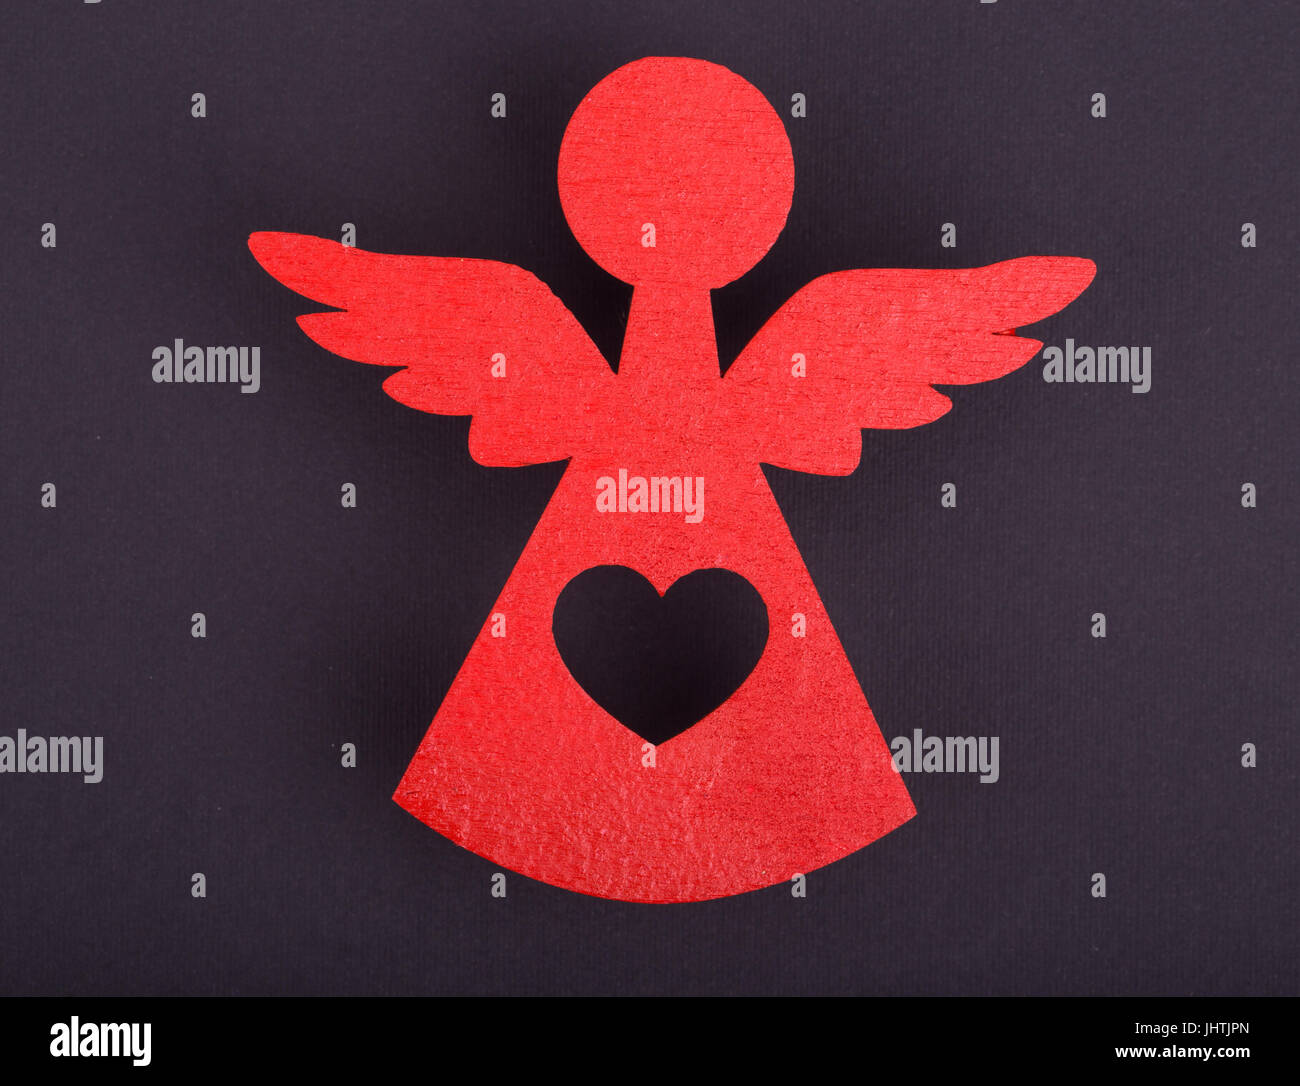 Christmas decorations of red angels on a black background Stock Photo